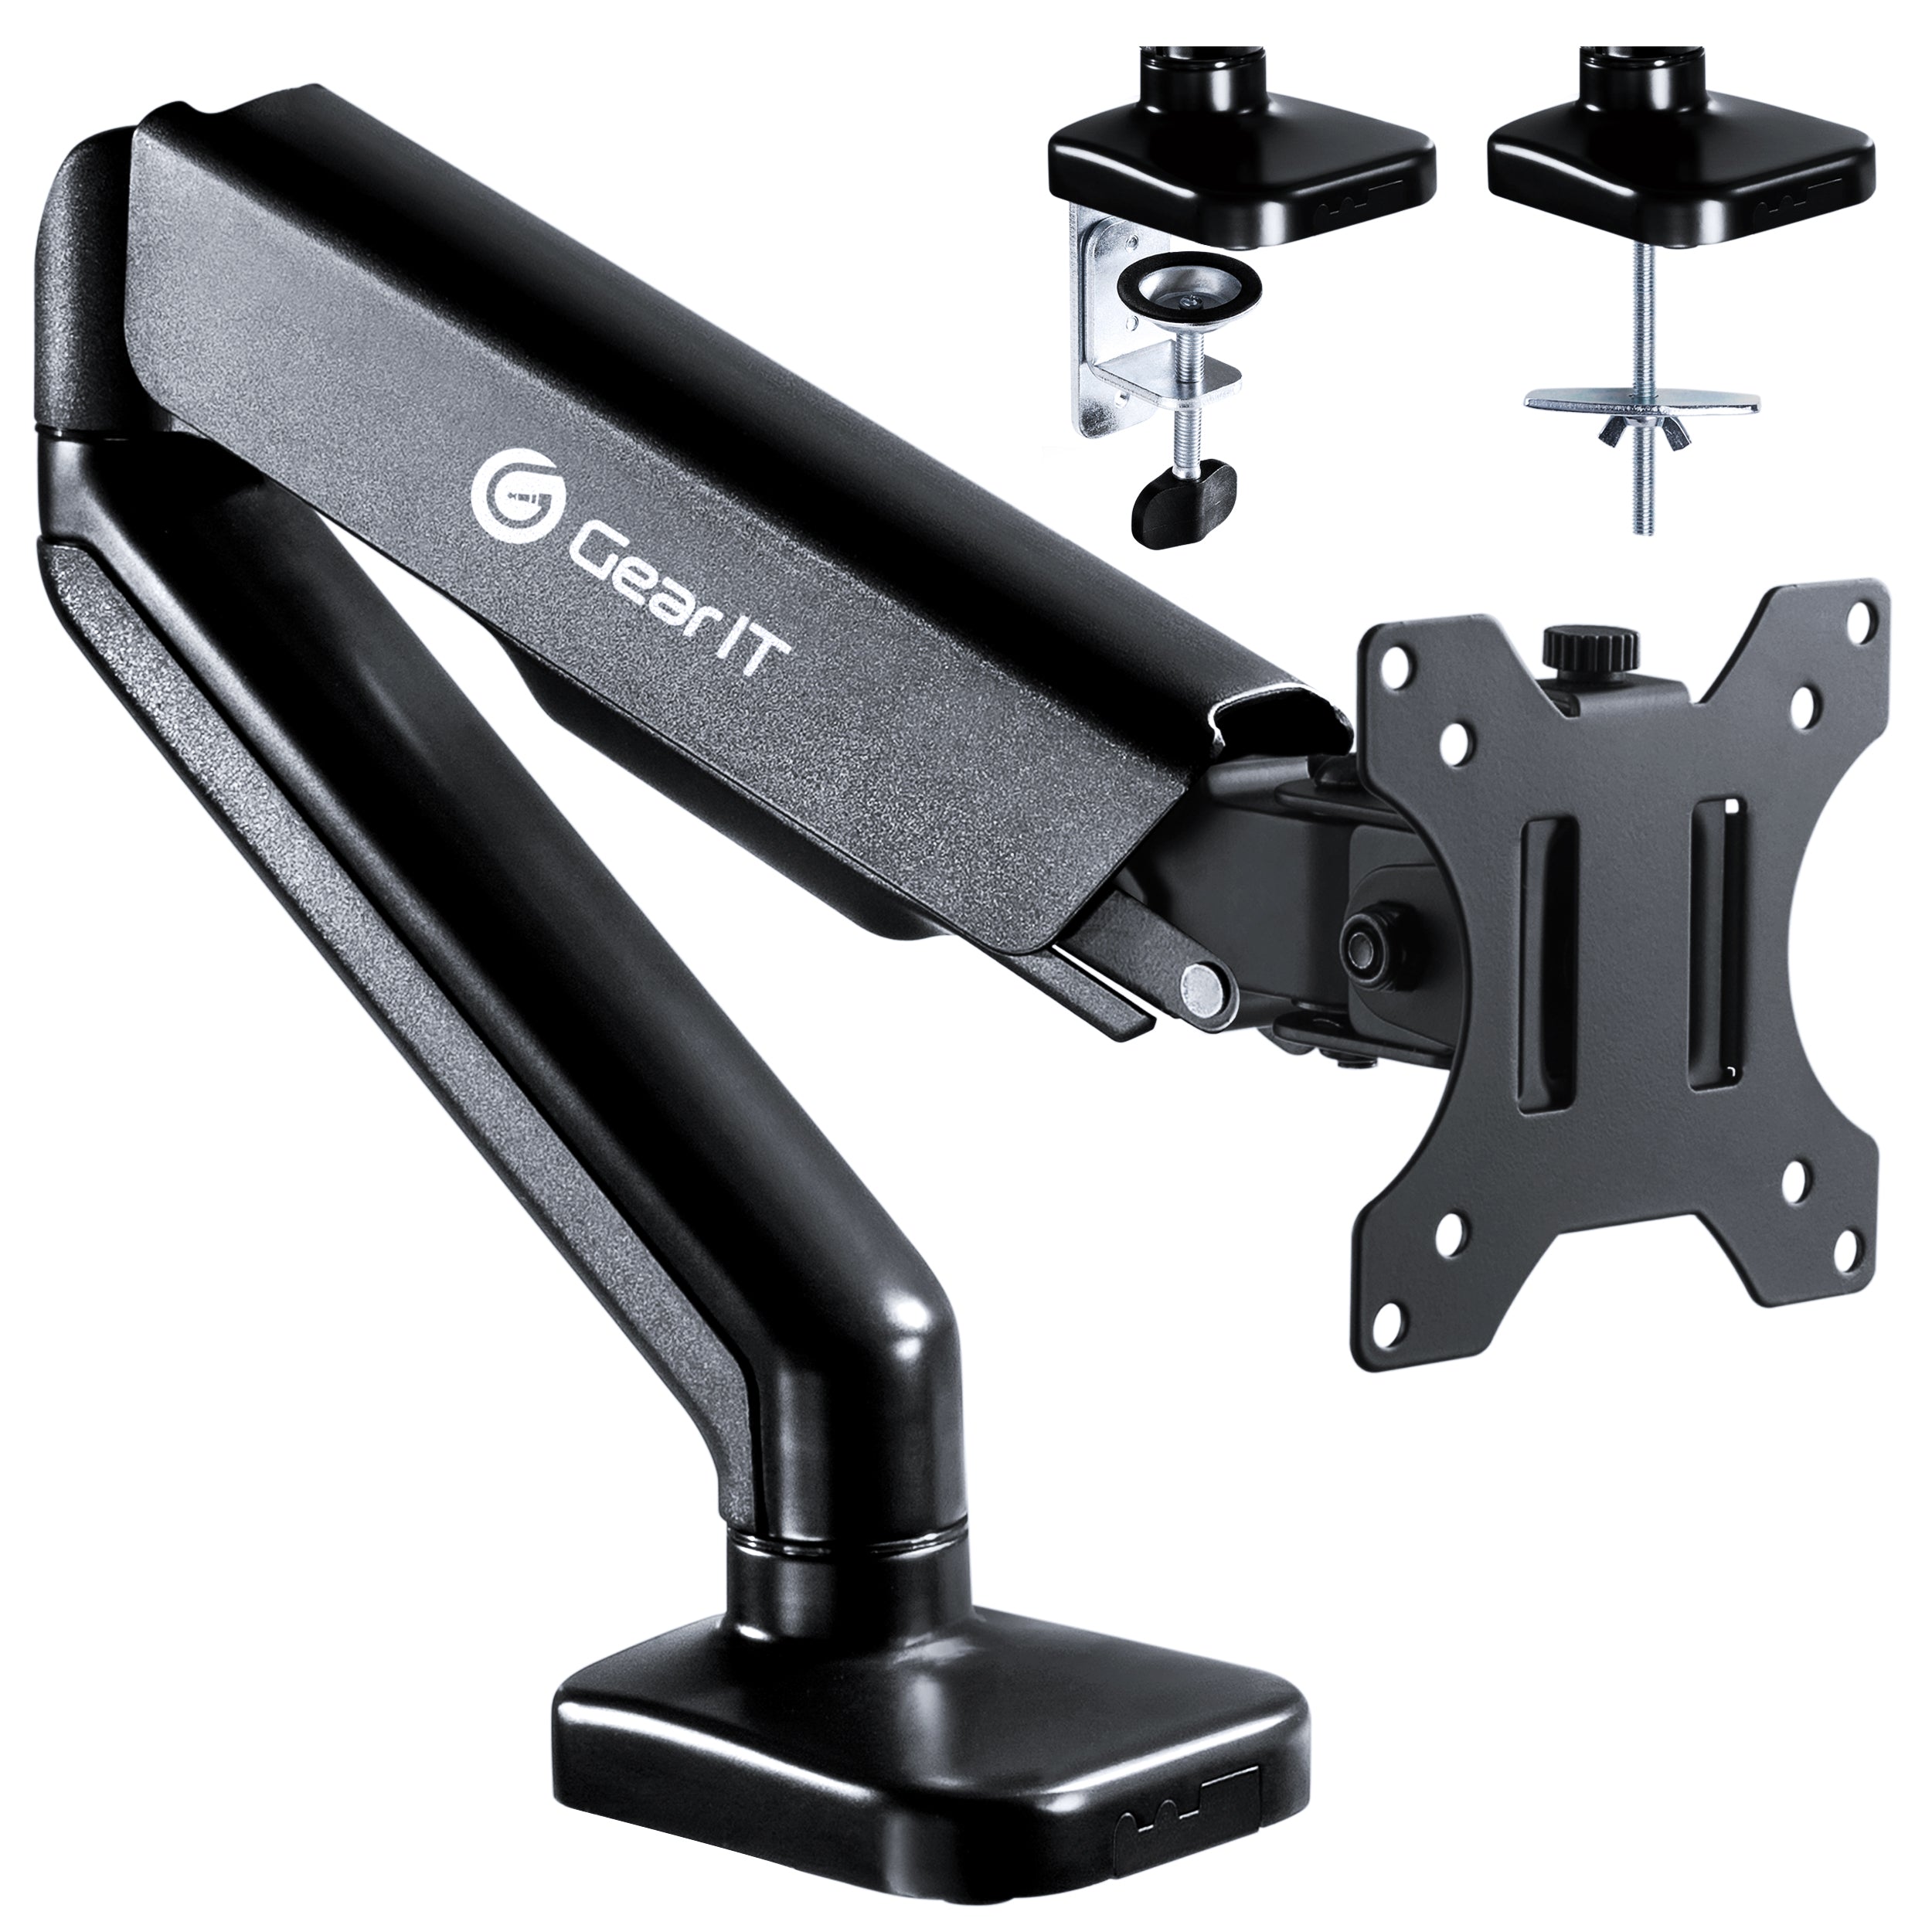 GearIT Single Monitor Mount (Up to 32 inch, 19.8 lbs) Desk Stand Mount for LCD LED Monitor, Fully Adjustable Articulating Gas Spring Arm with Quick